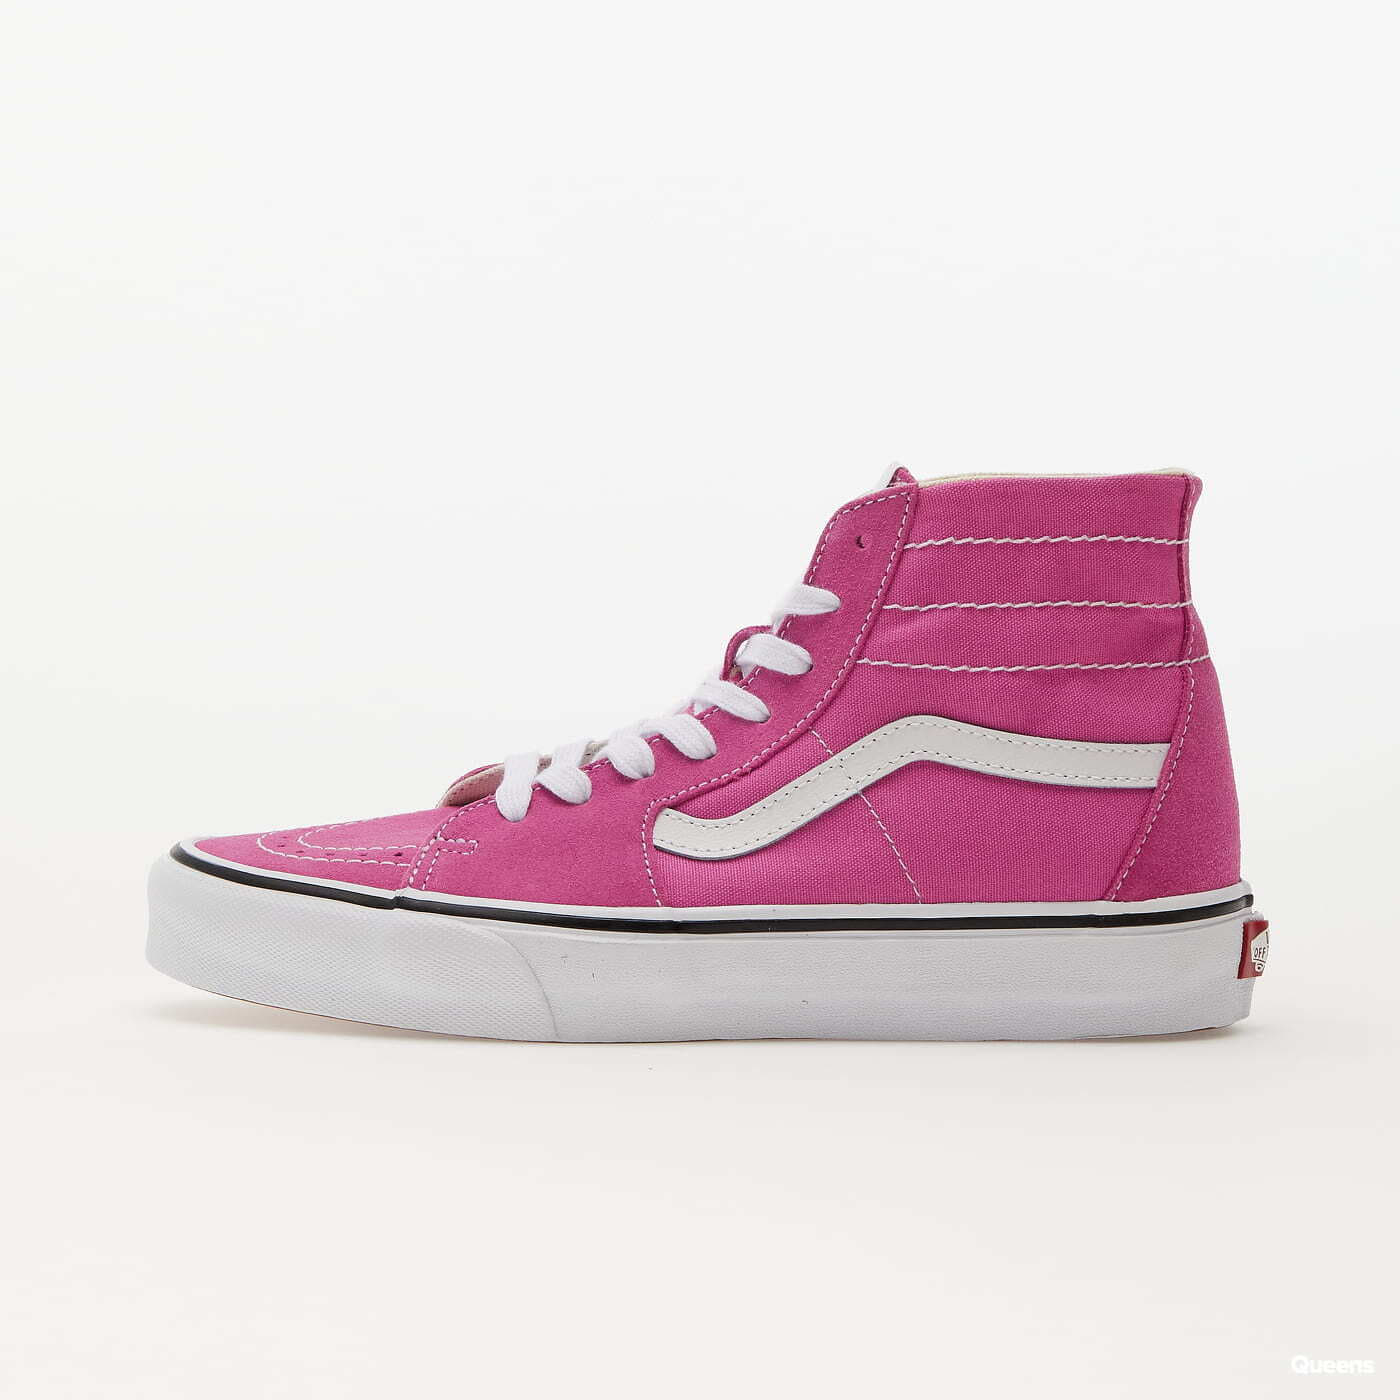 Women's shoes Vans Sk8-Hi Tapered Color Theory Fiji Flower